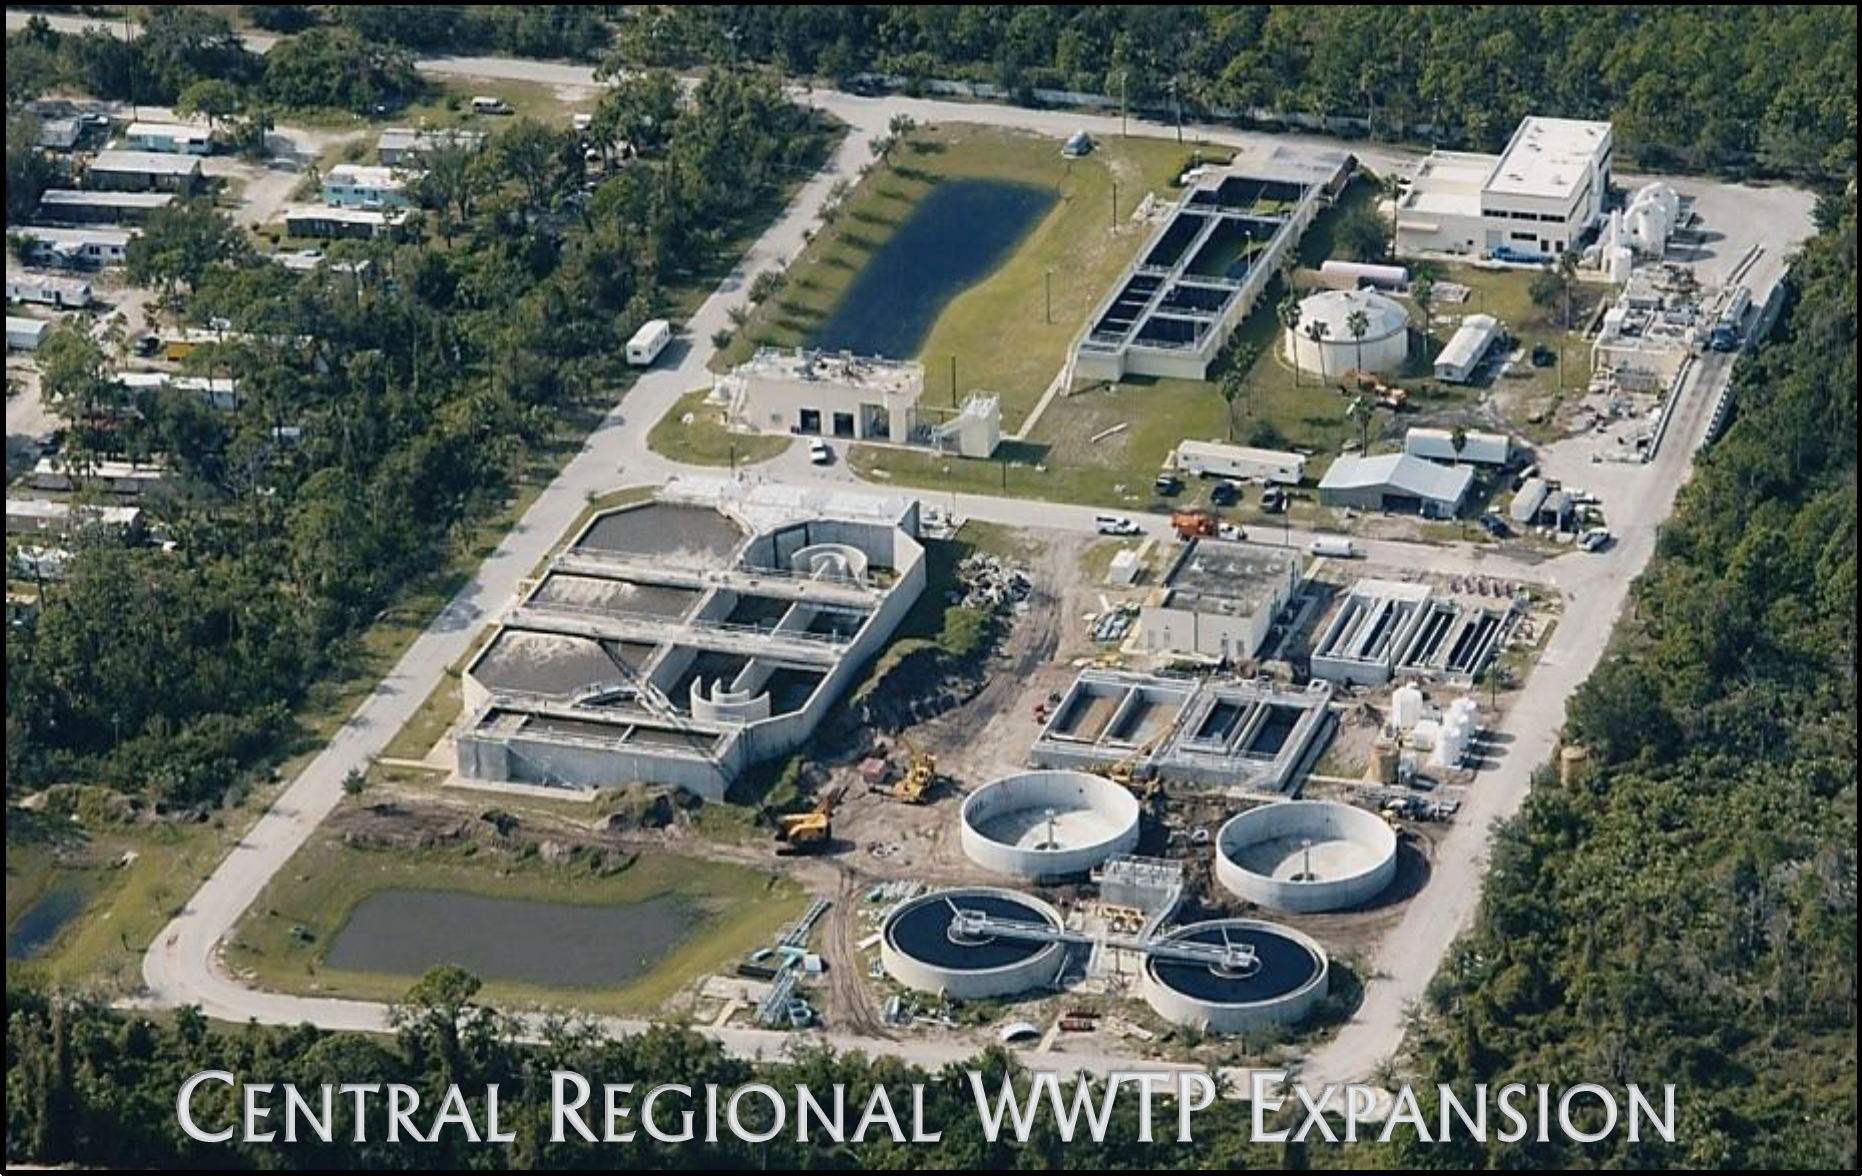 Central Regional WWTP Expansion